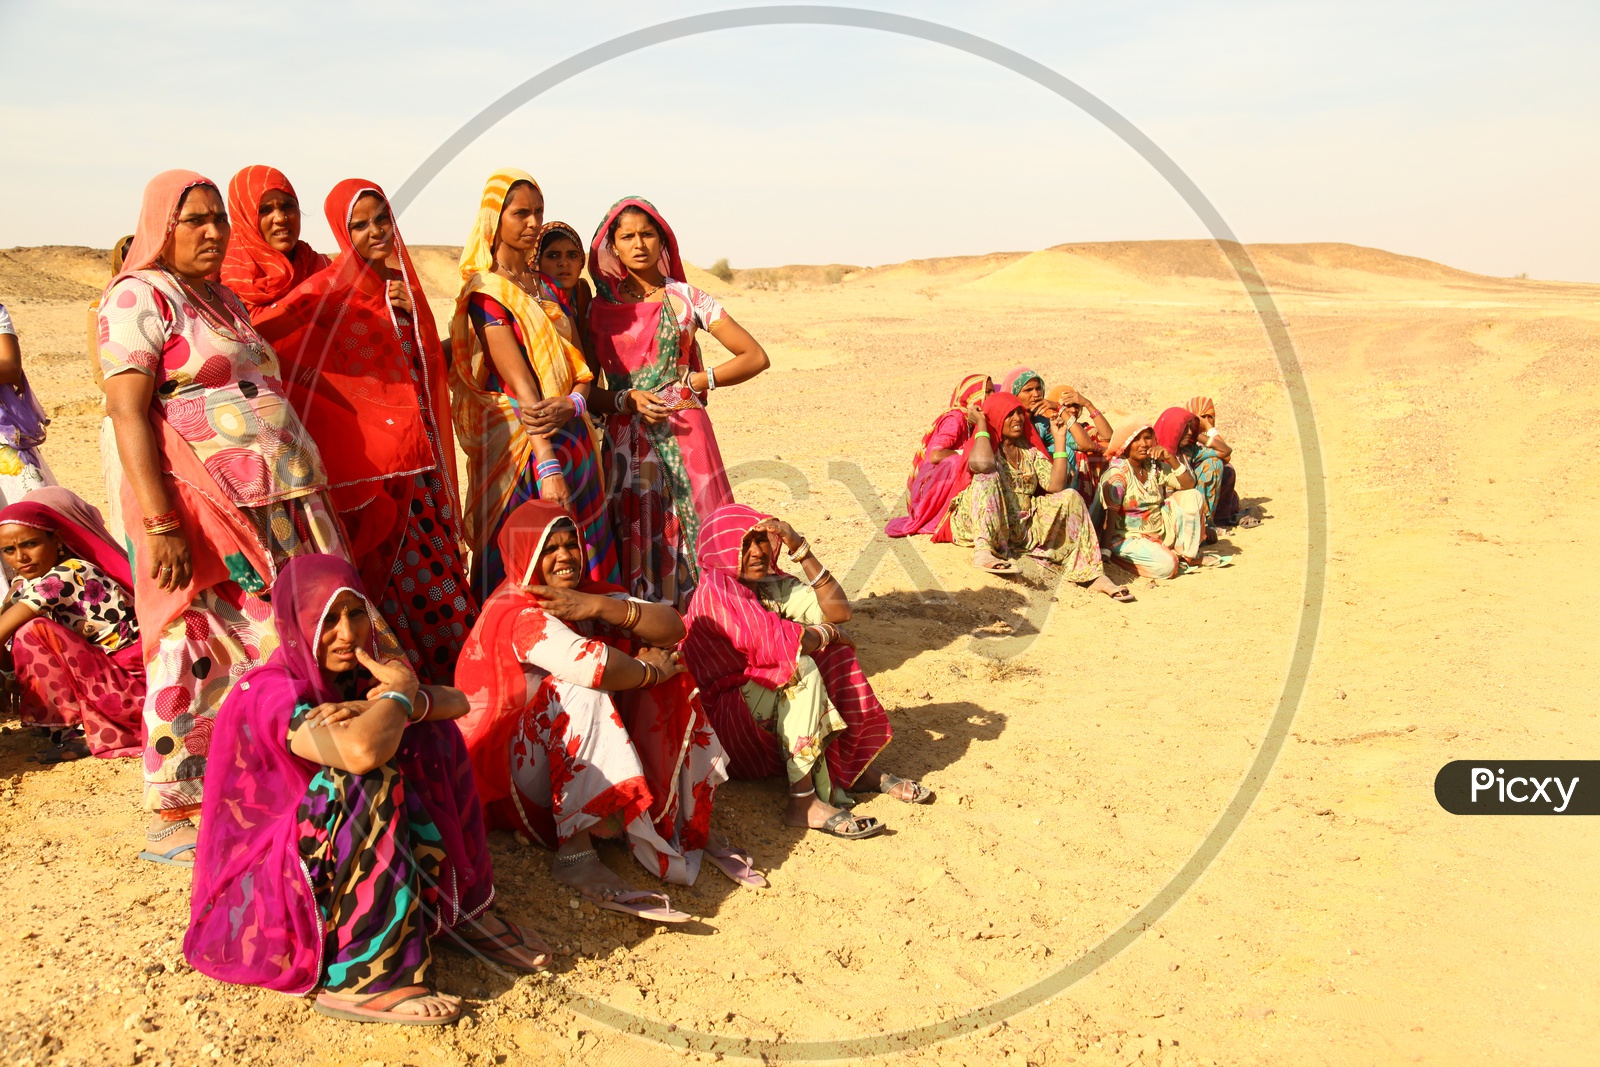 Local rajasthan Woman Wearing Their traditional Sarees in Desert